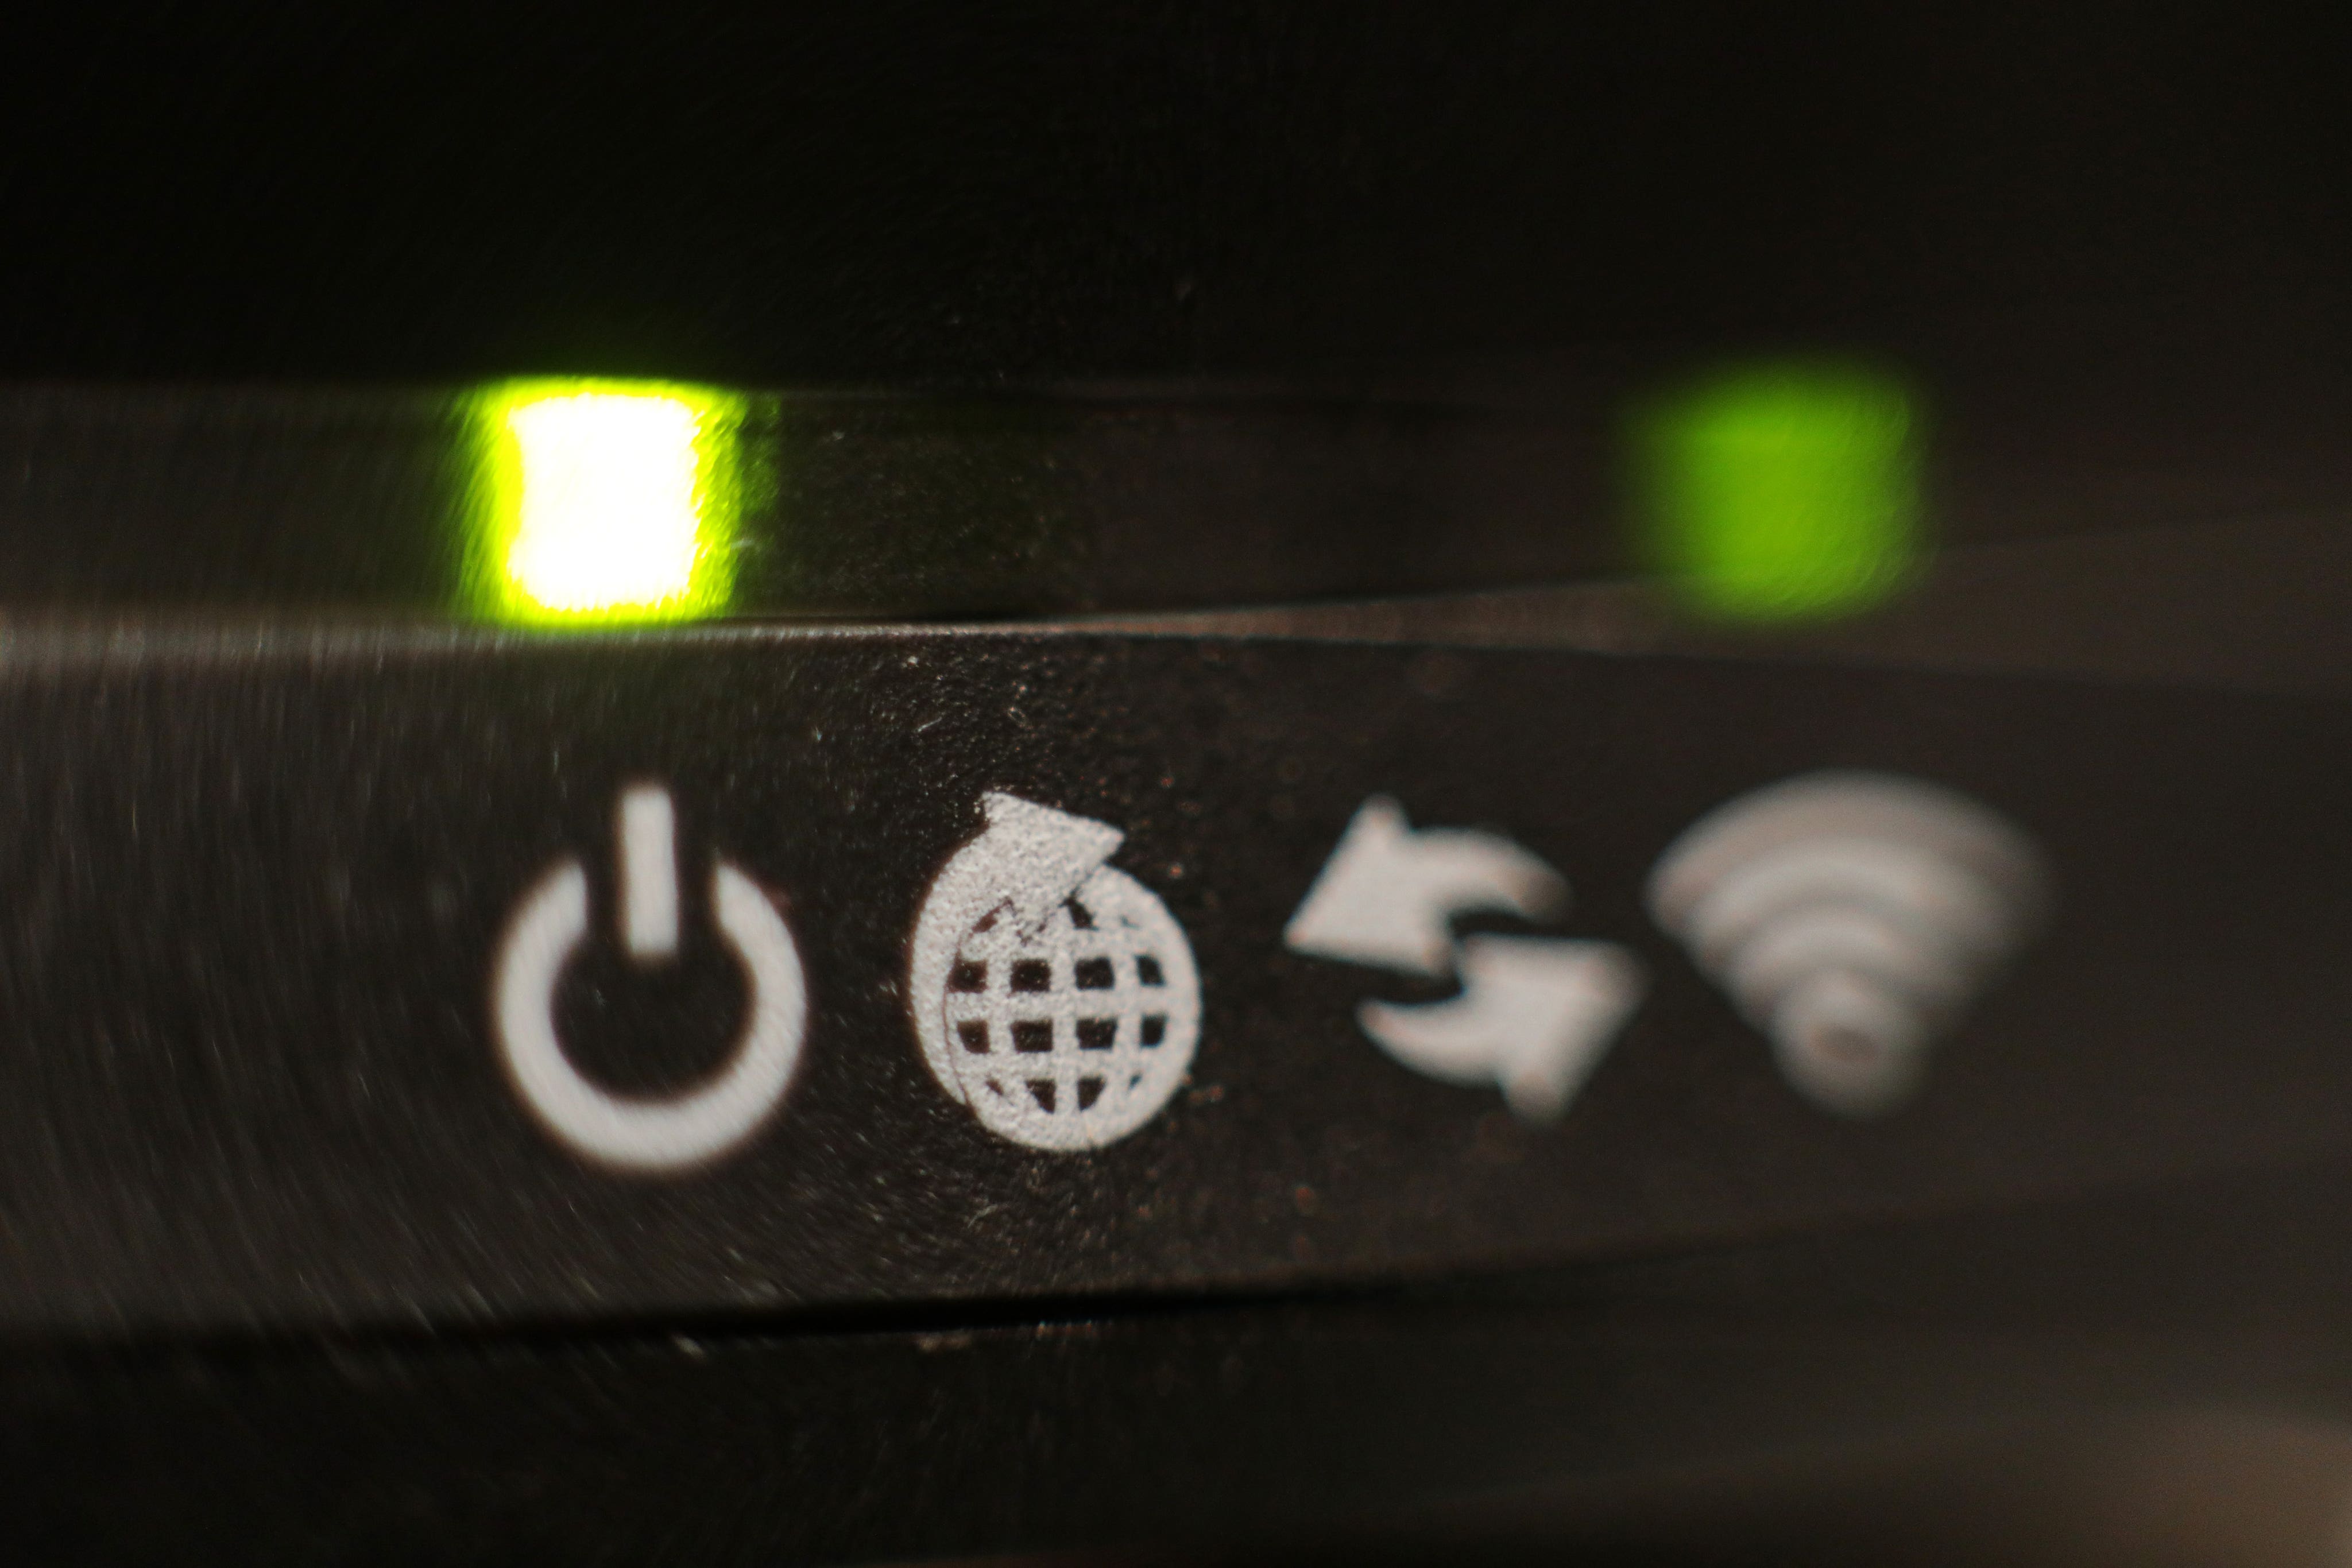 A broadband router